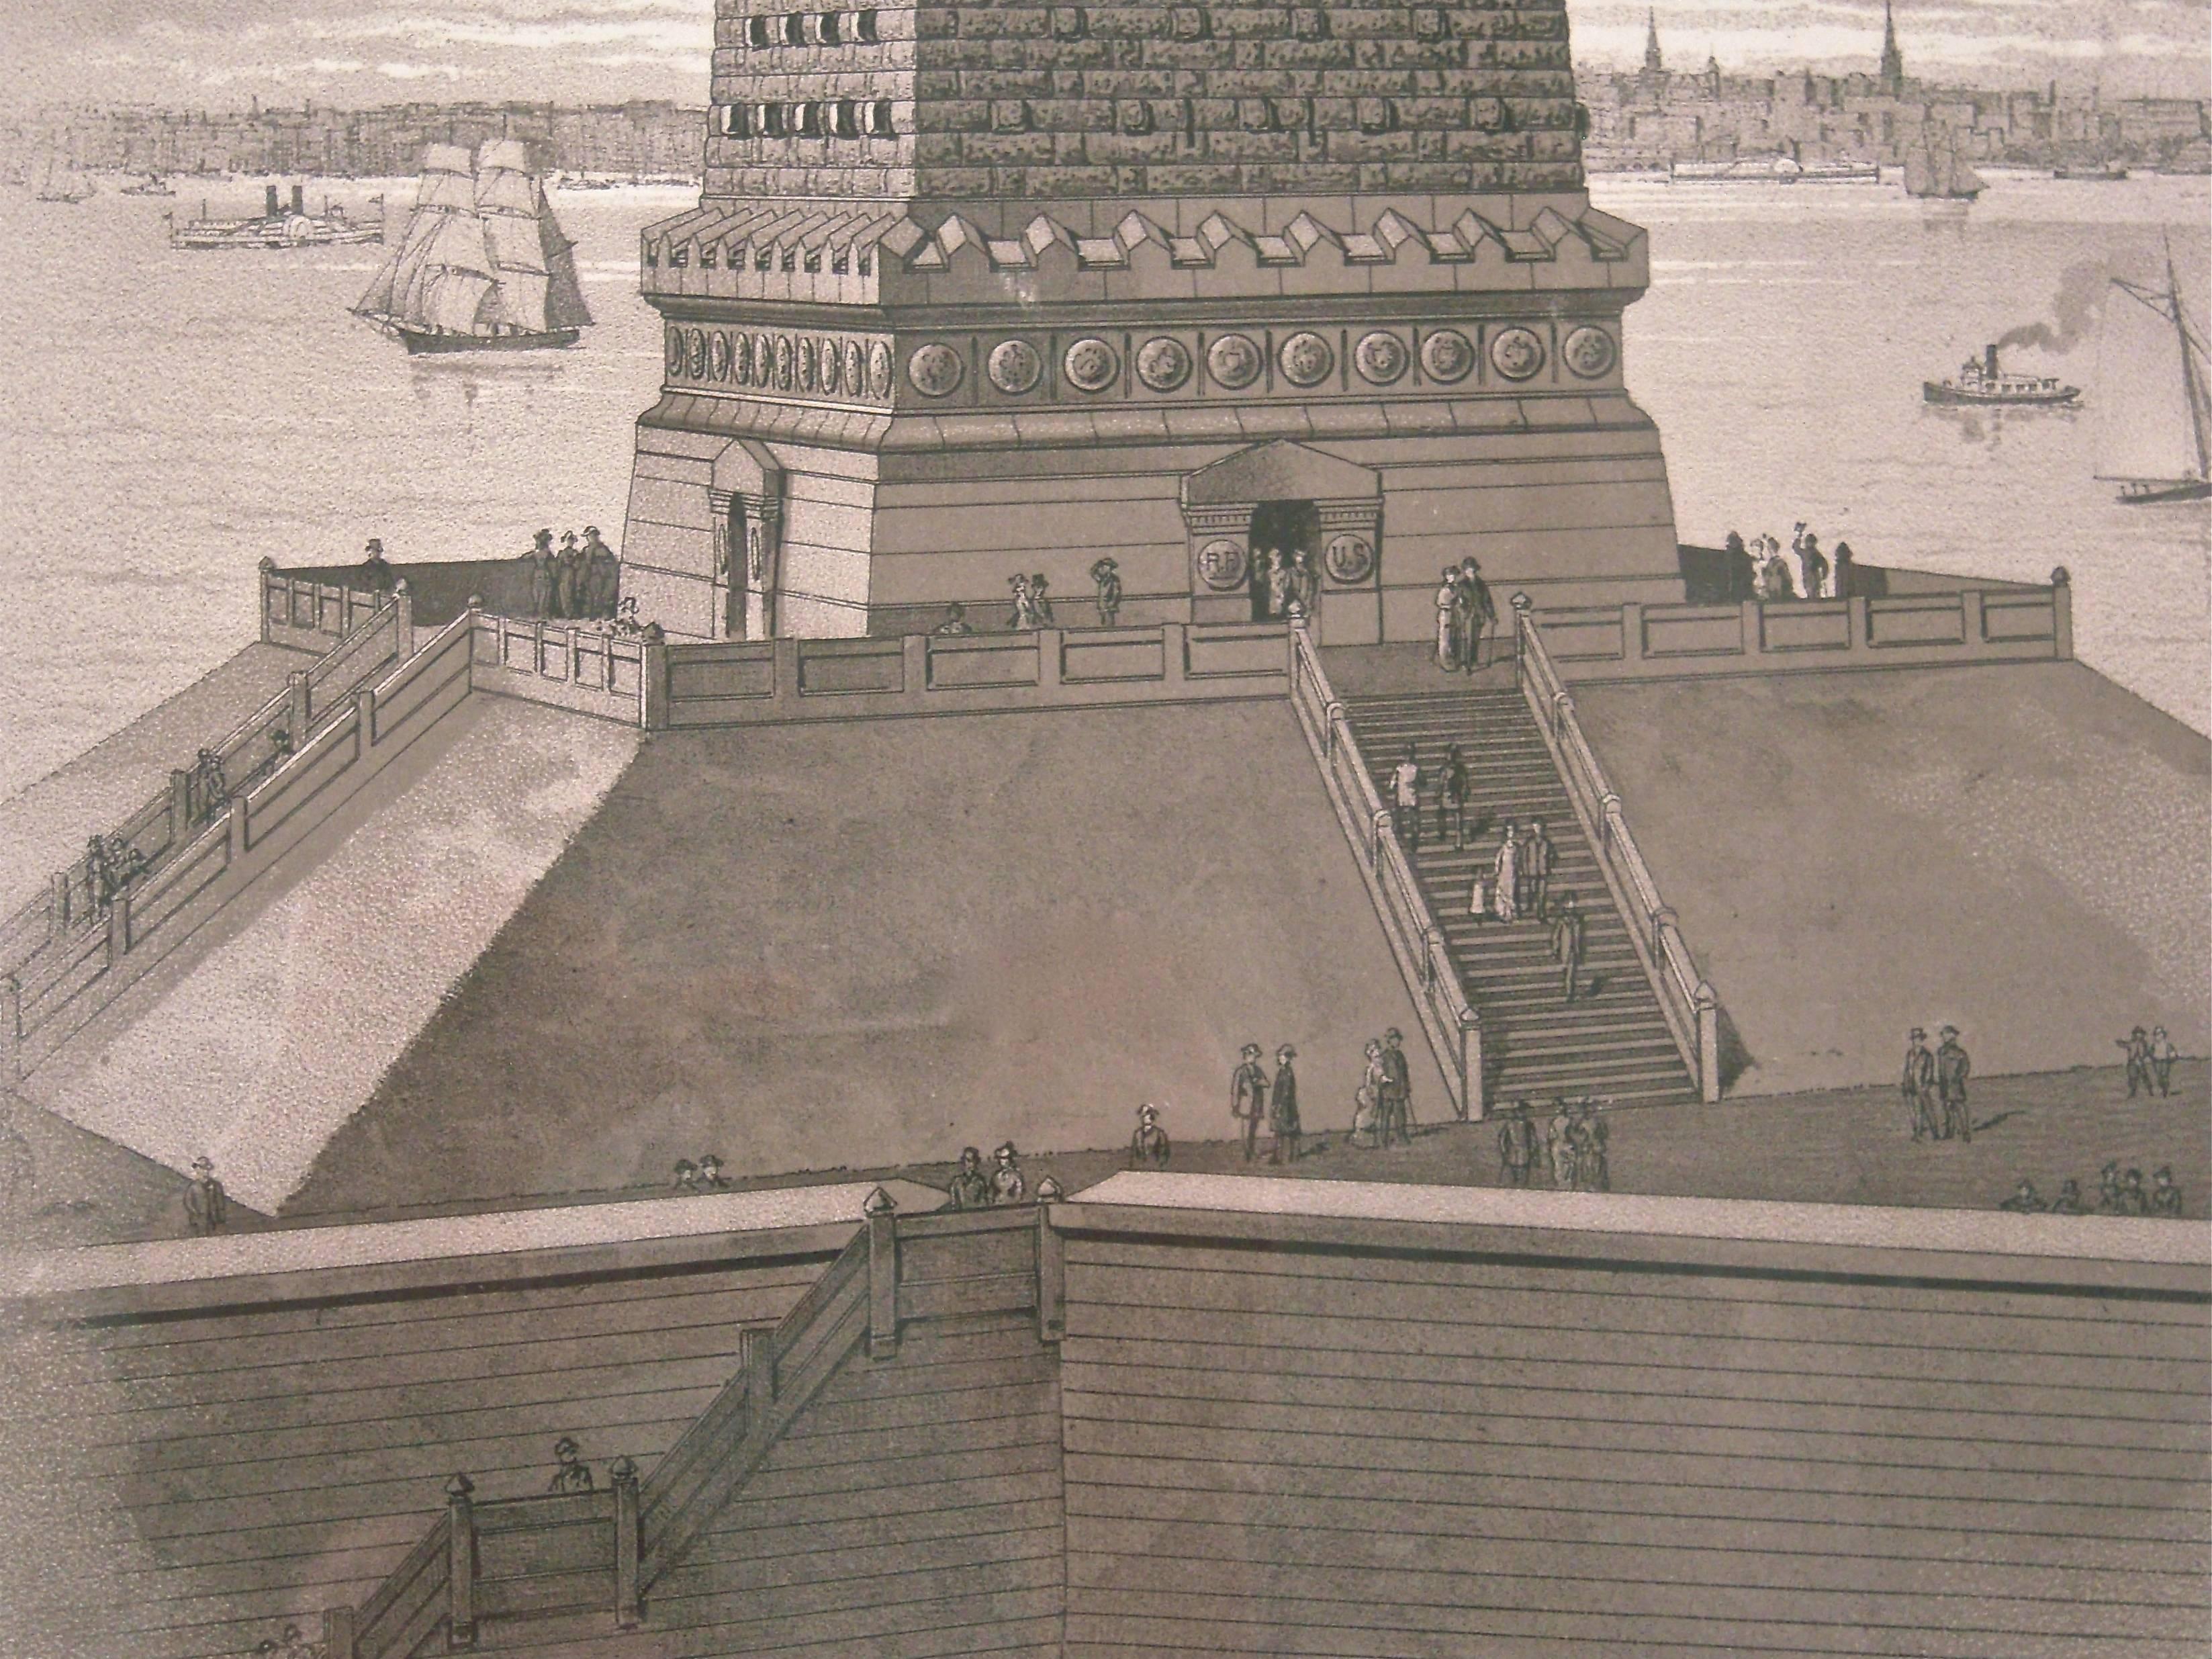 Statue of Liberty Print by Root and Tinker, circa 1883, 36